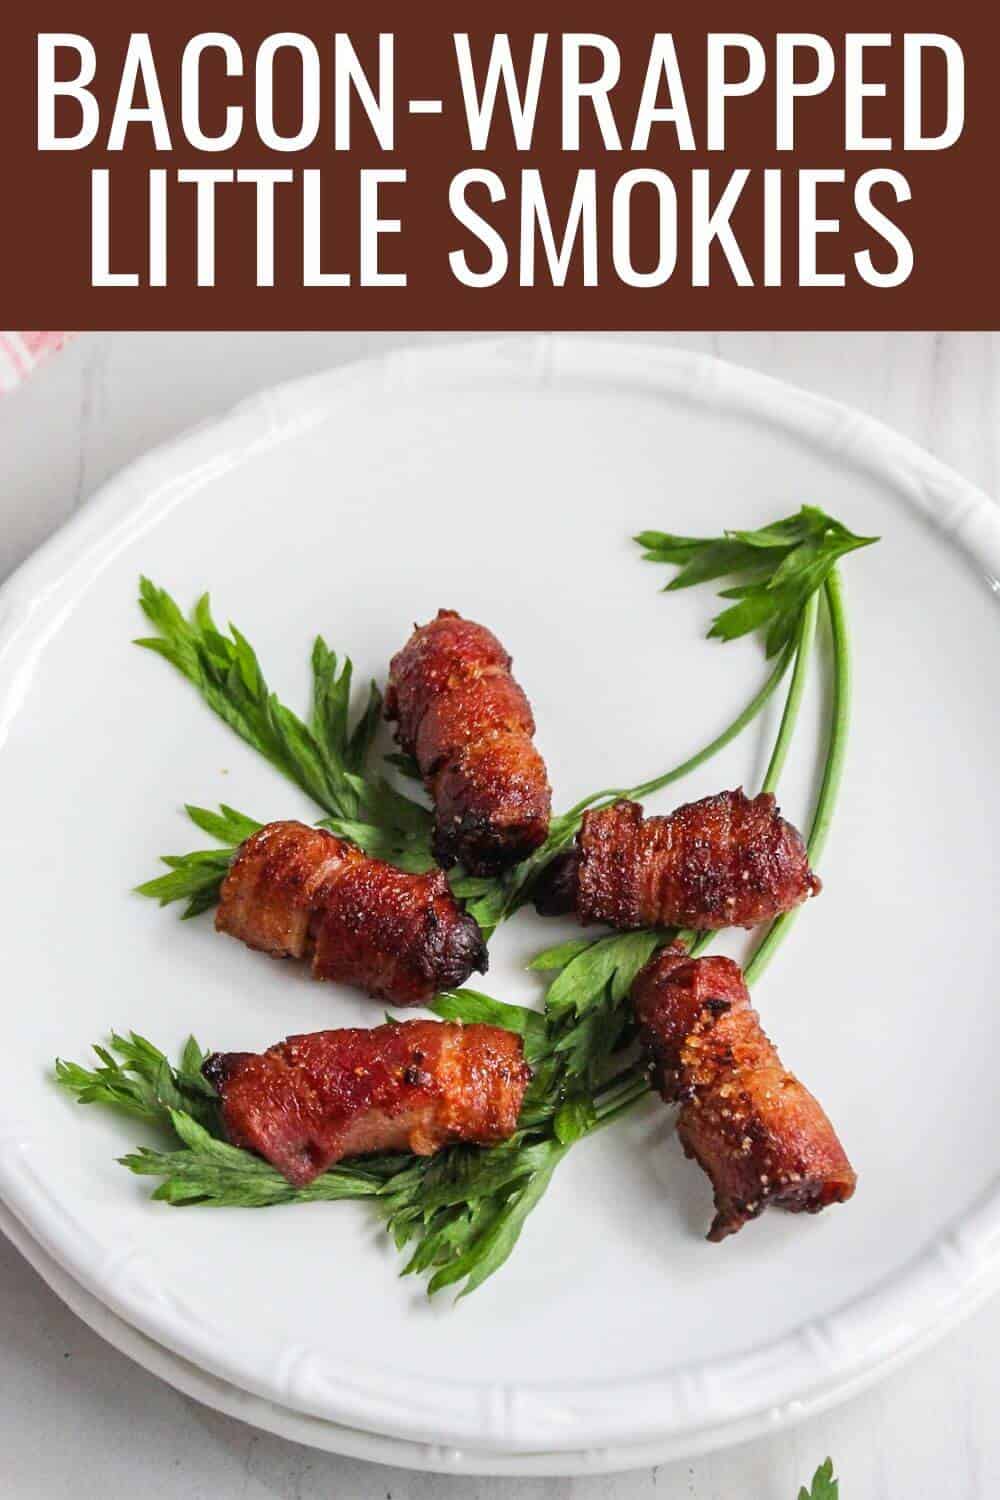 Bacon wrapped little smokies with recipe title text overlay.